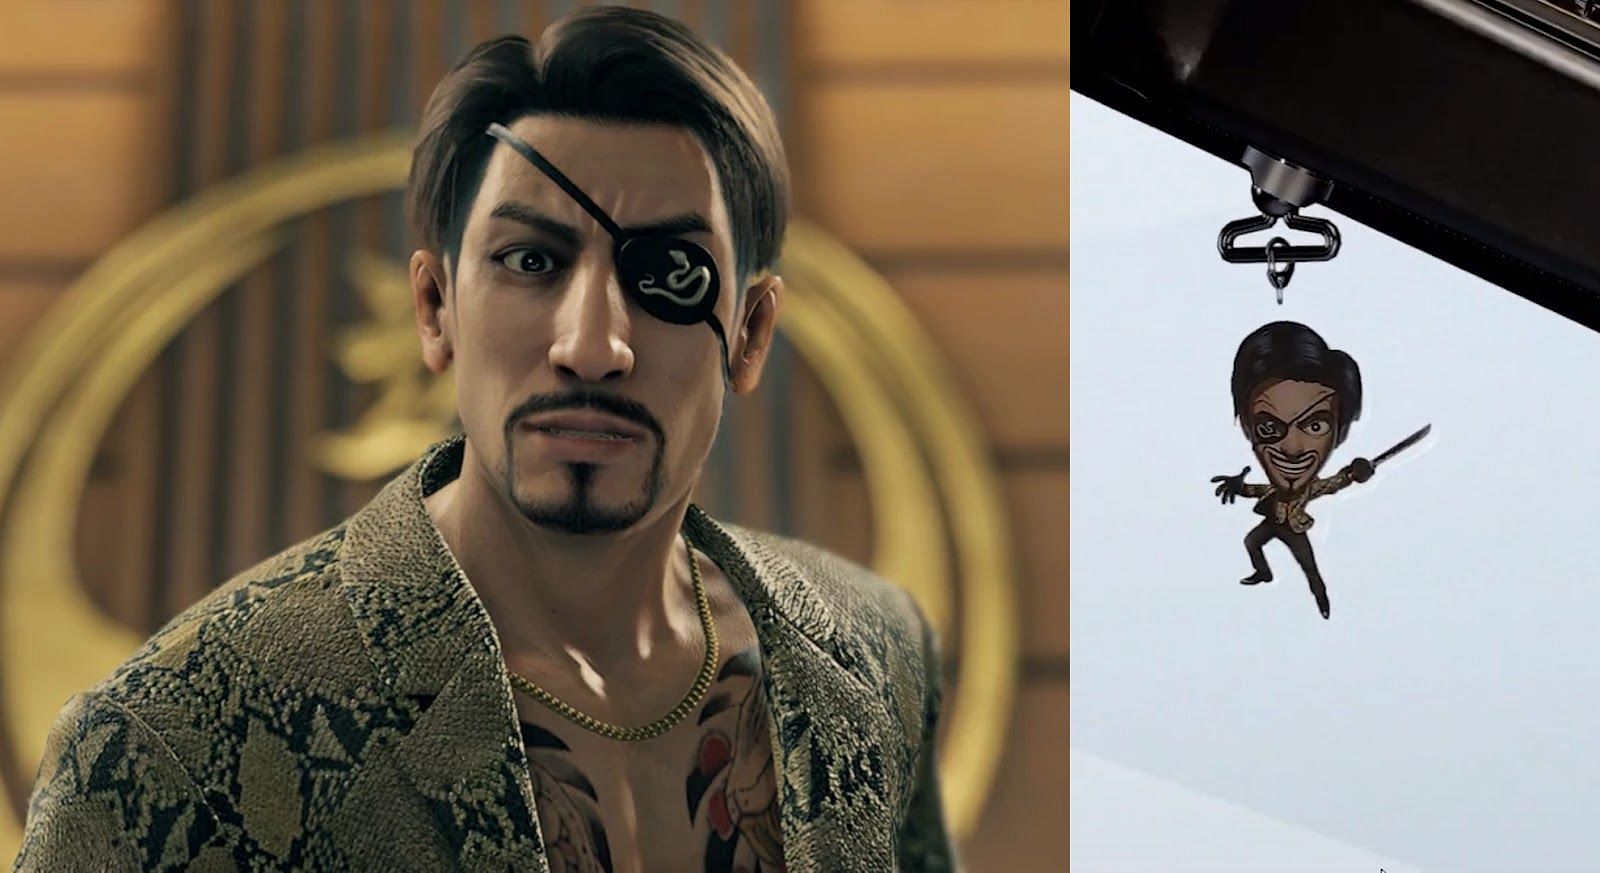 👑:3c 💙 6.5 Spoilers on X: Now that most of the Yakuza series